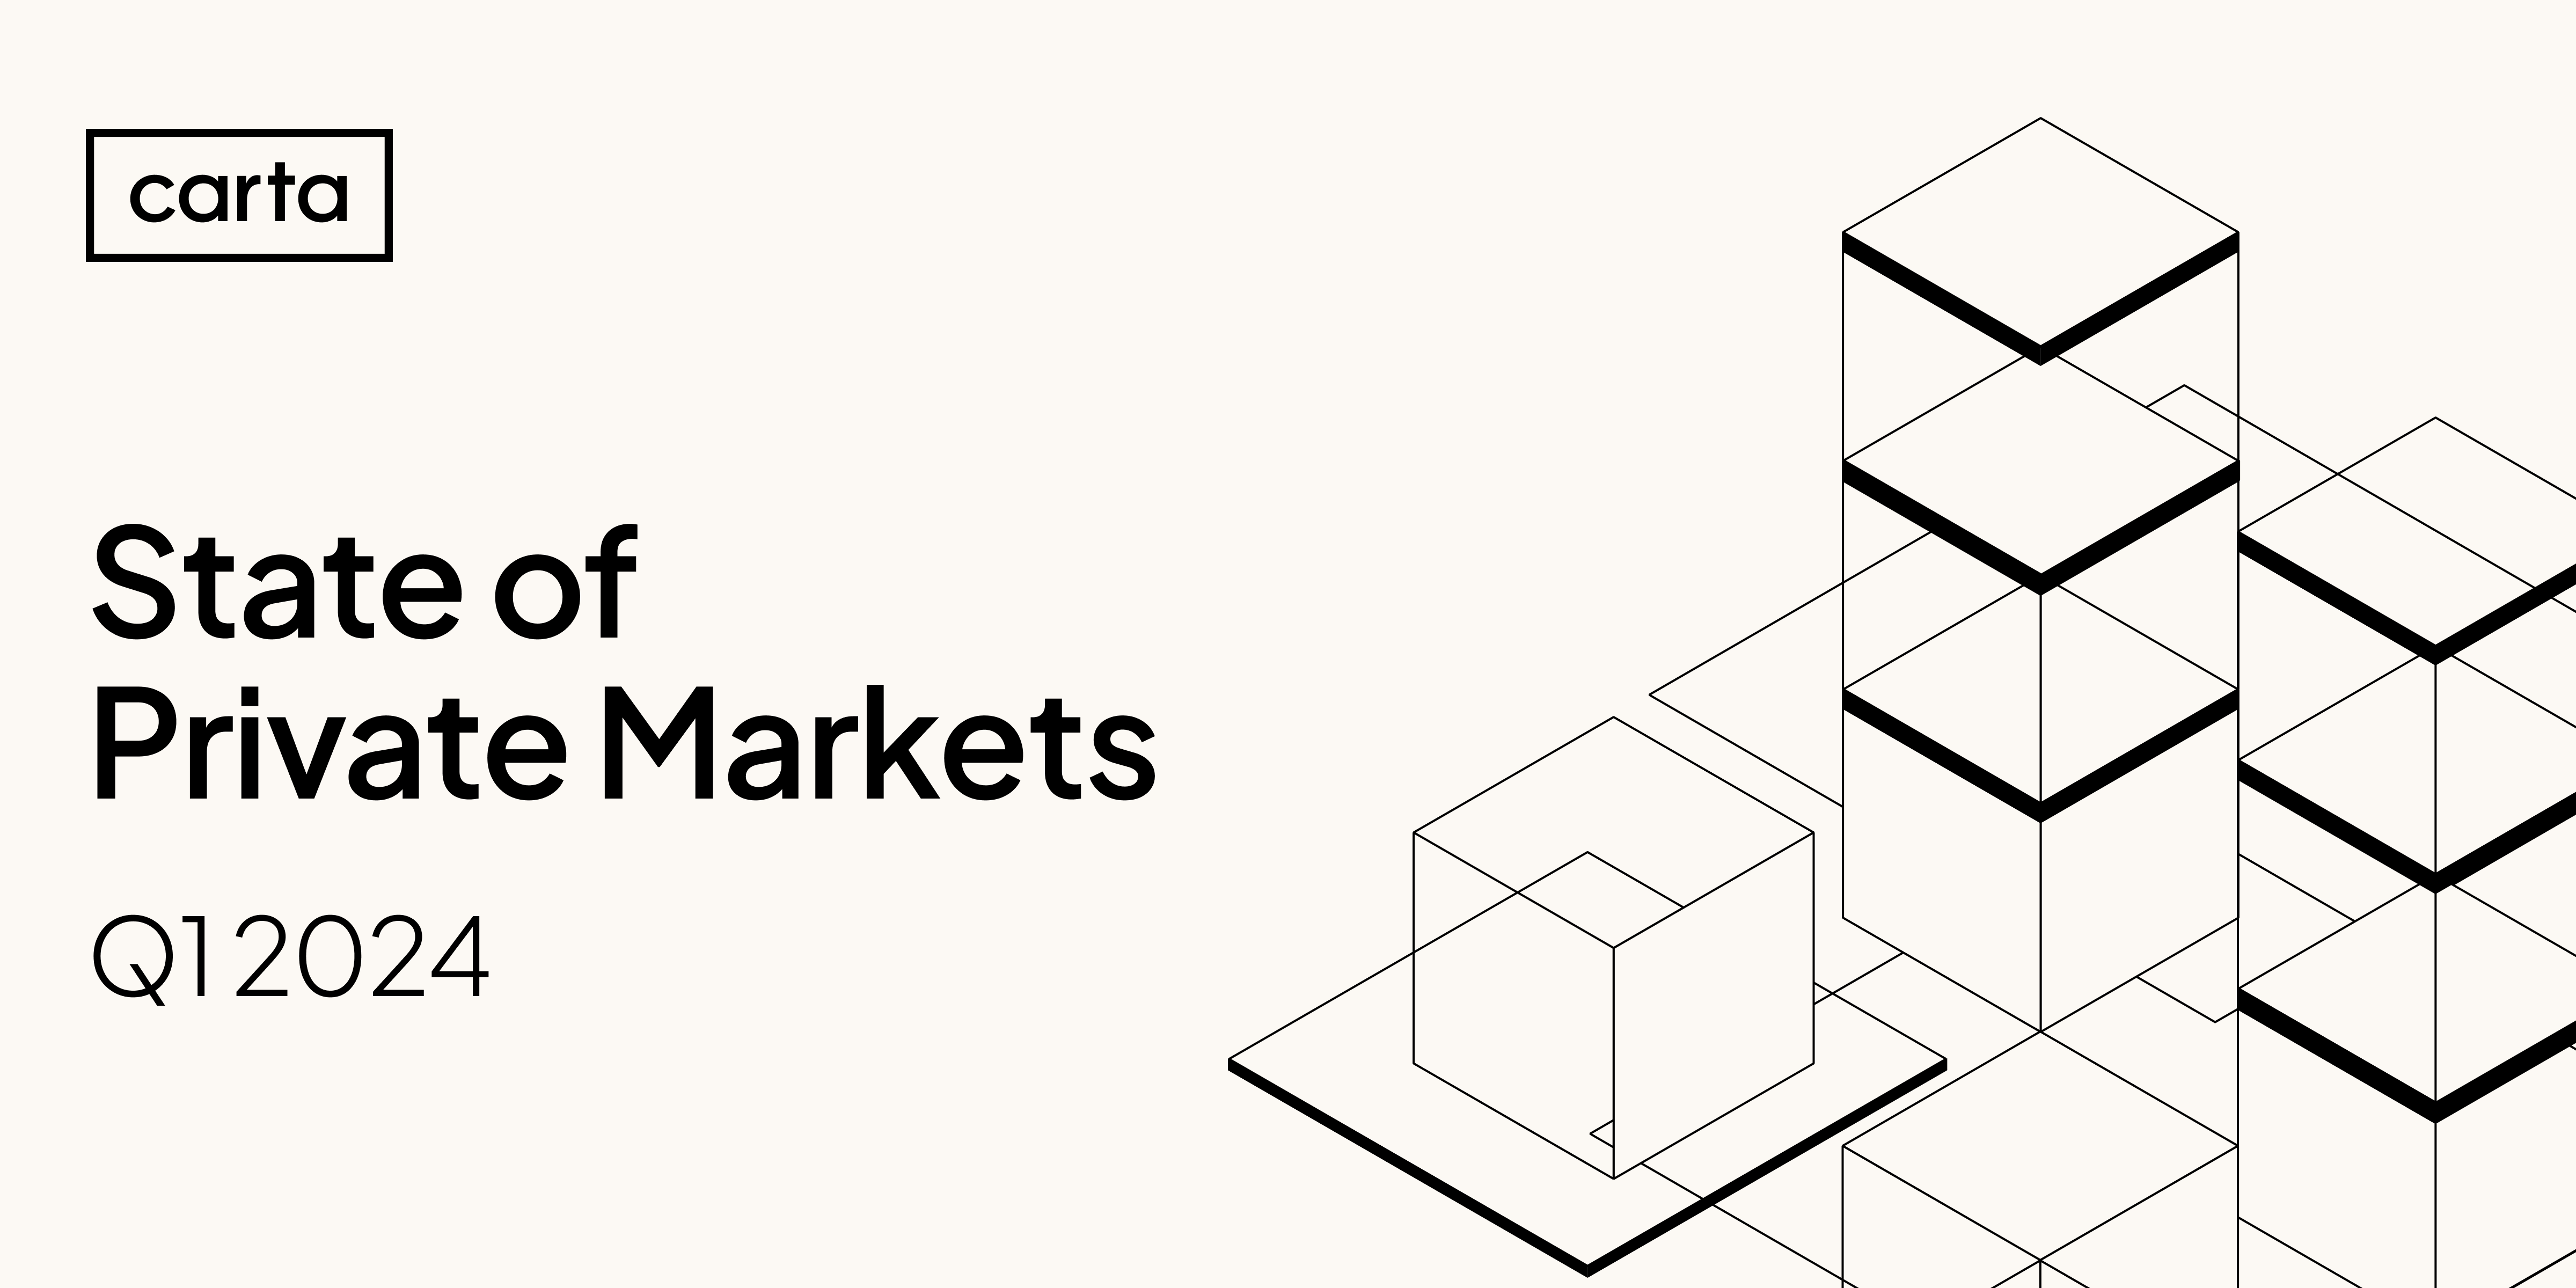 State of Private Markets: Q1 2024